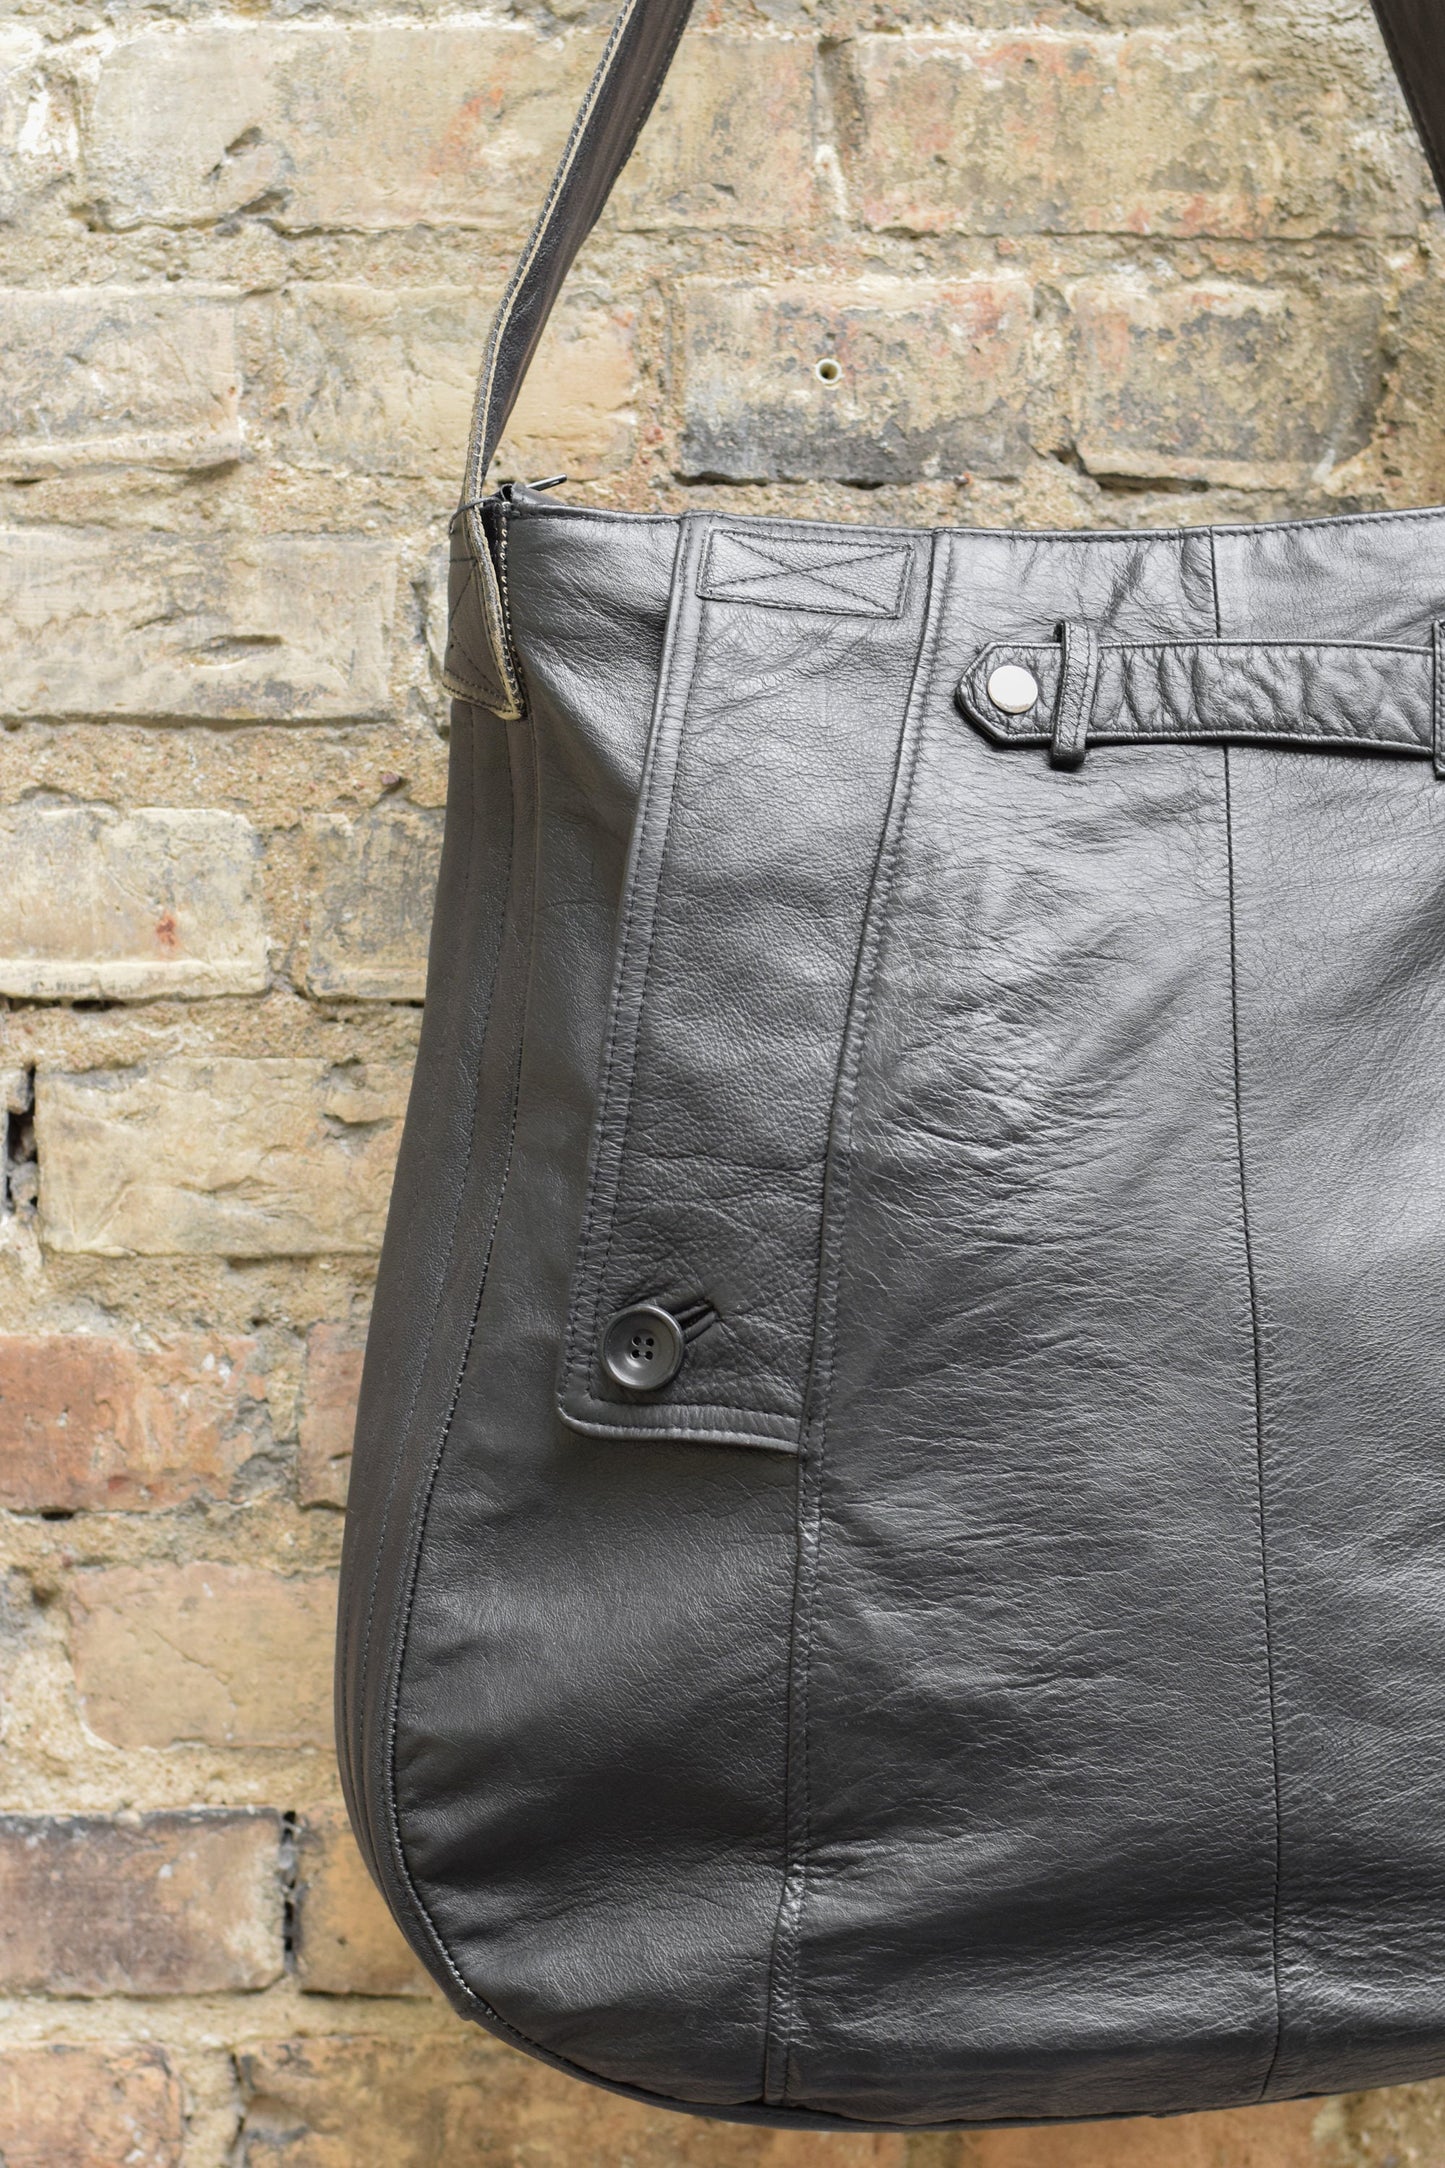 Upcycled Leather Bag #2